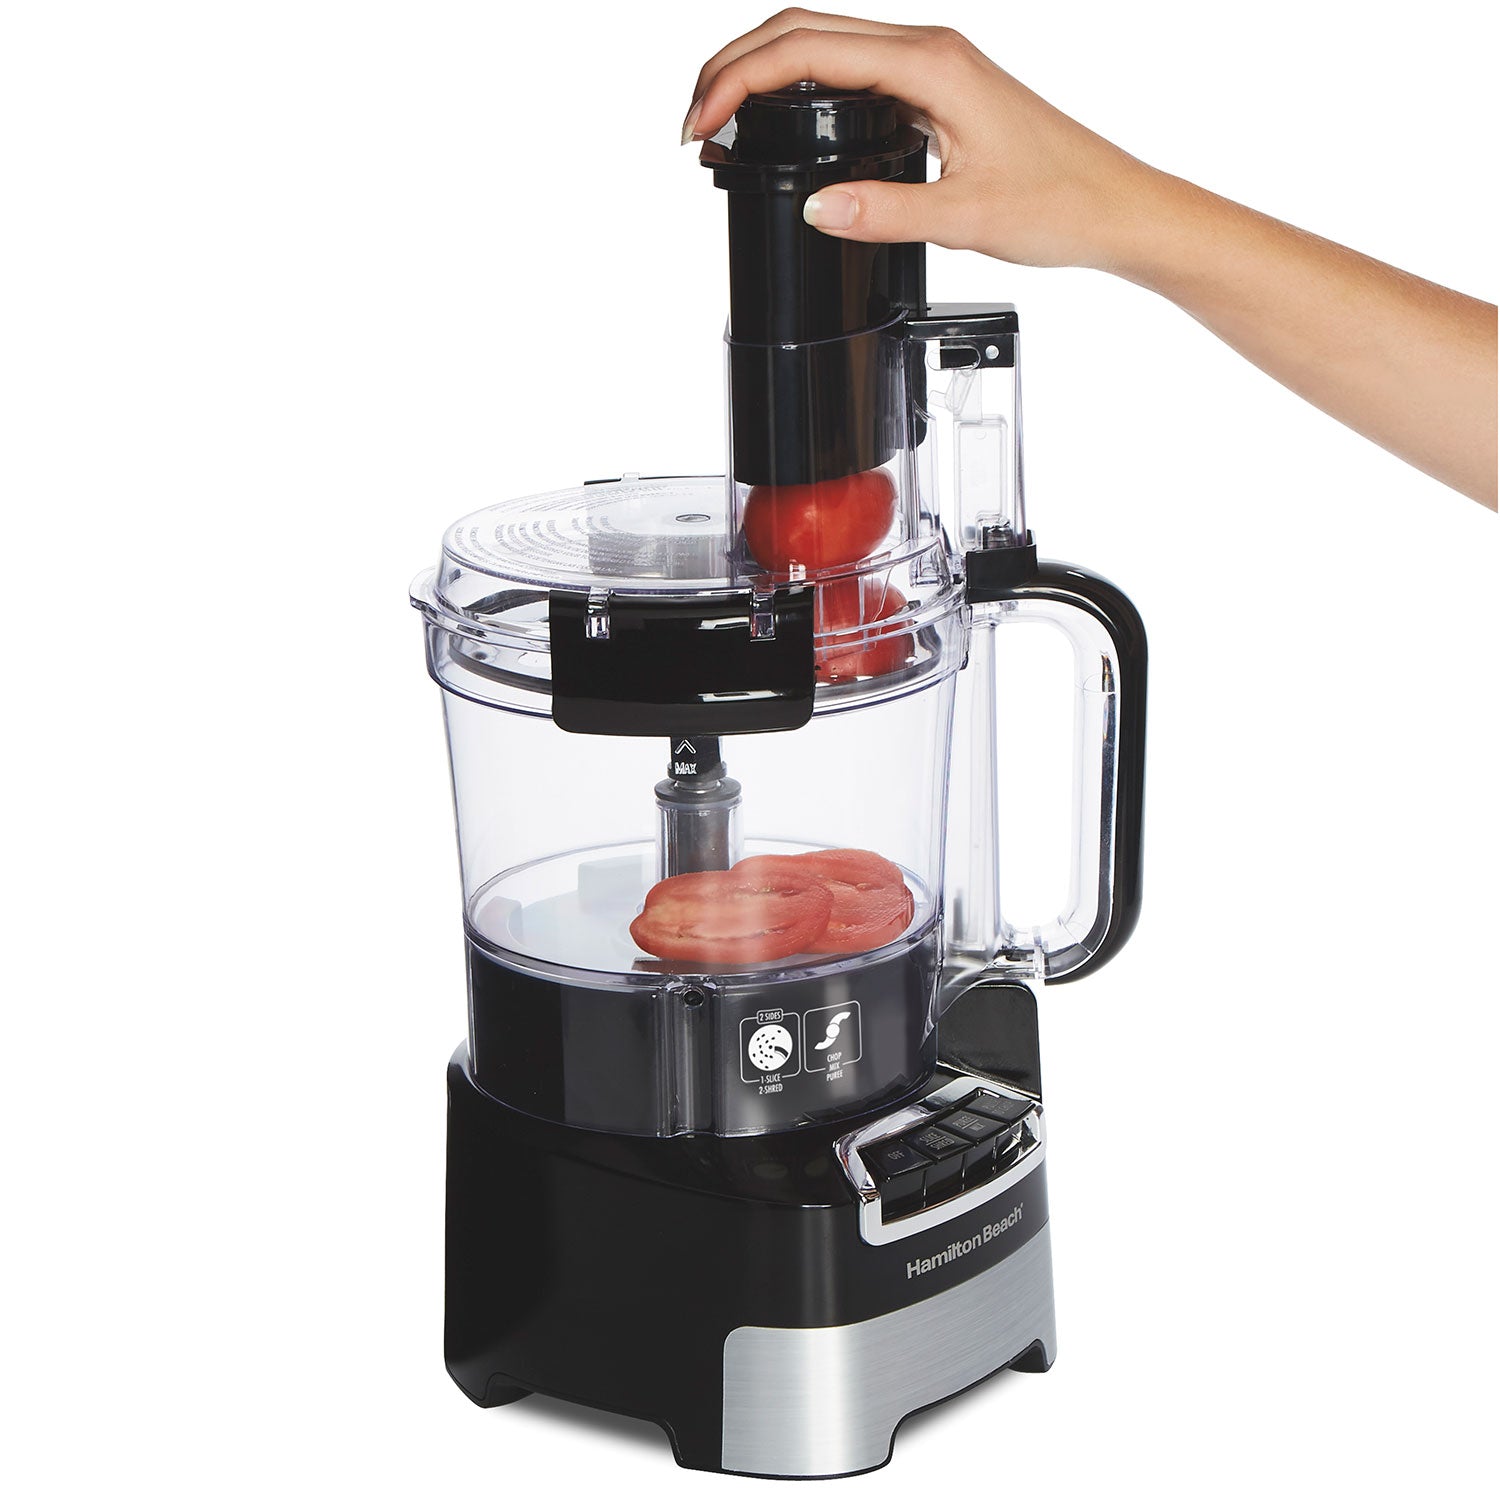 Hamilton Beach's 10-Cup Food Processor Is on Sale at